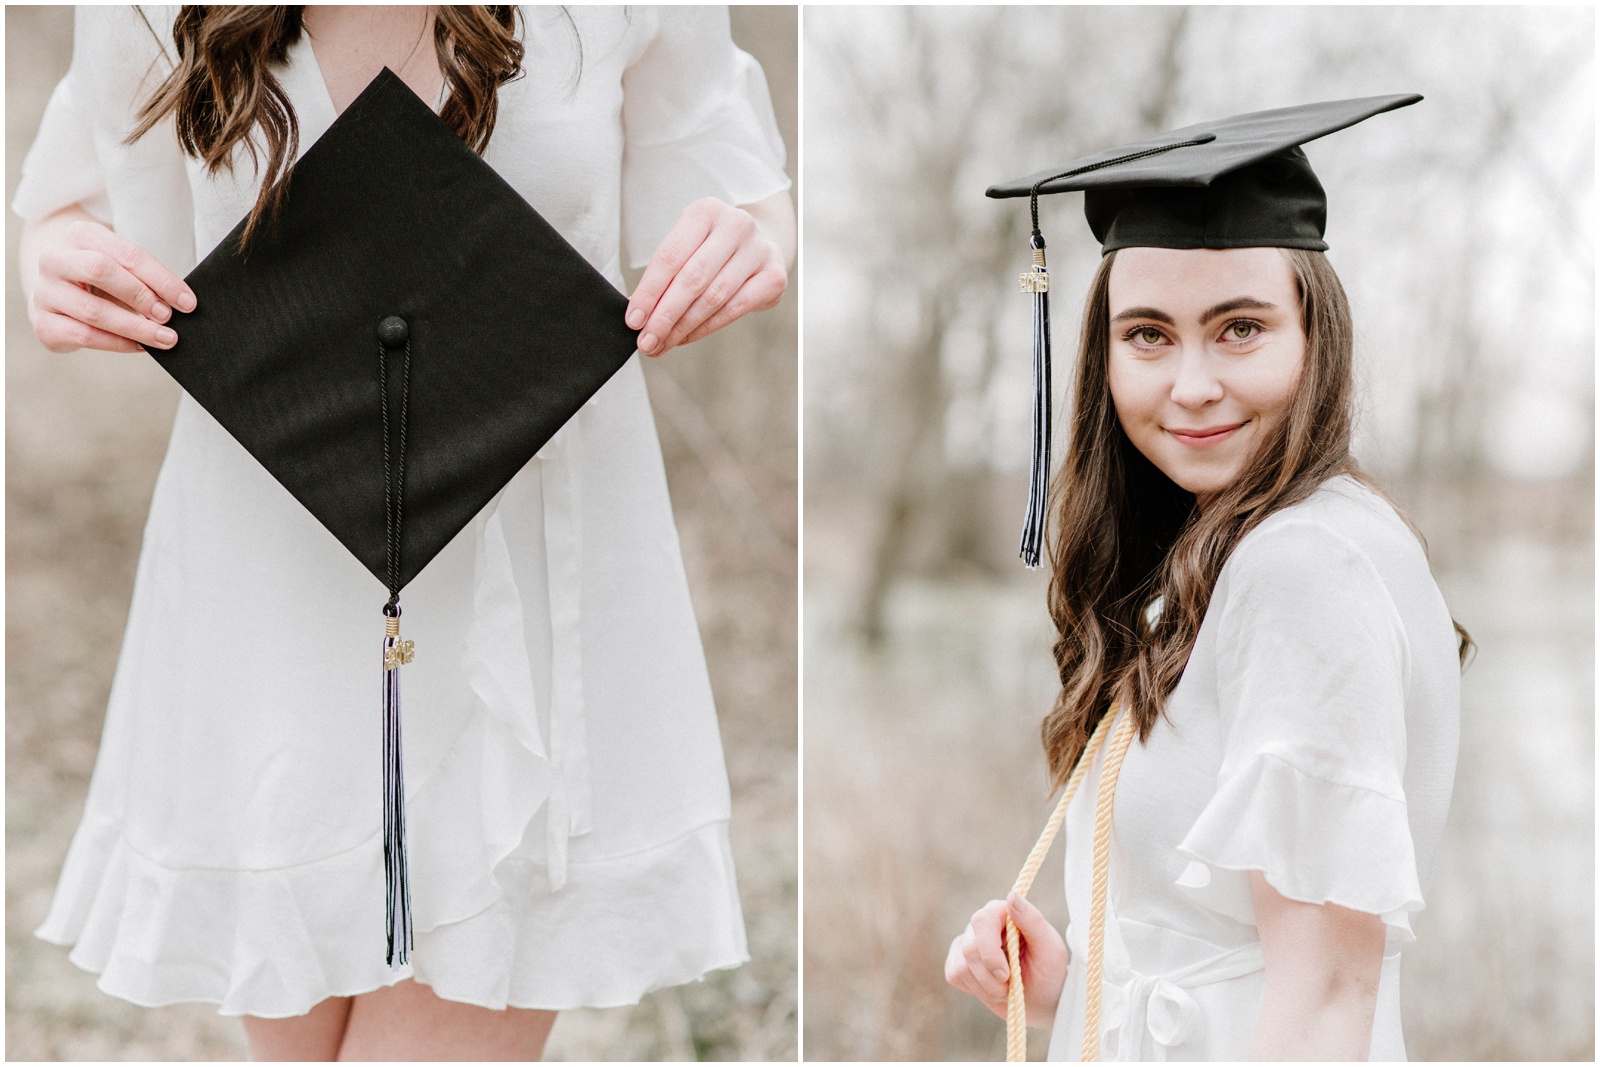 Senior portraits with a white dress in a forest preserve